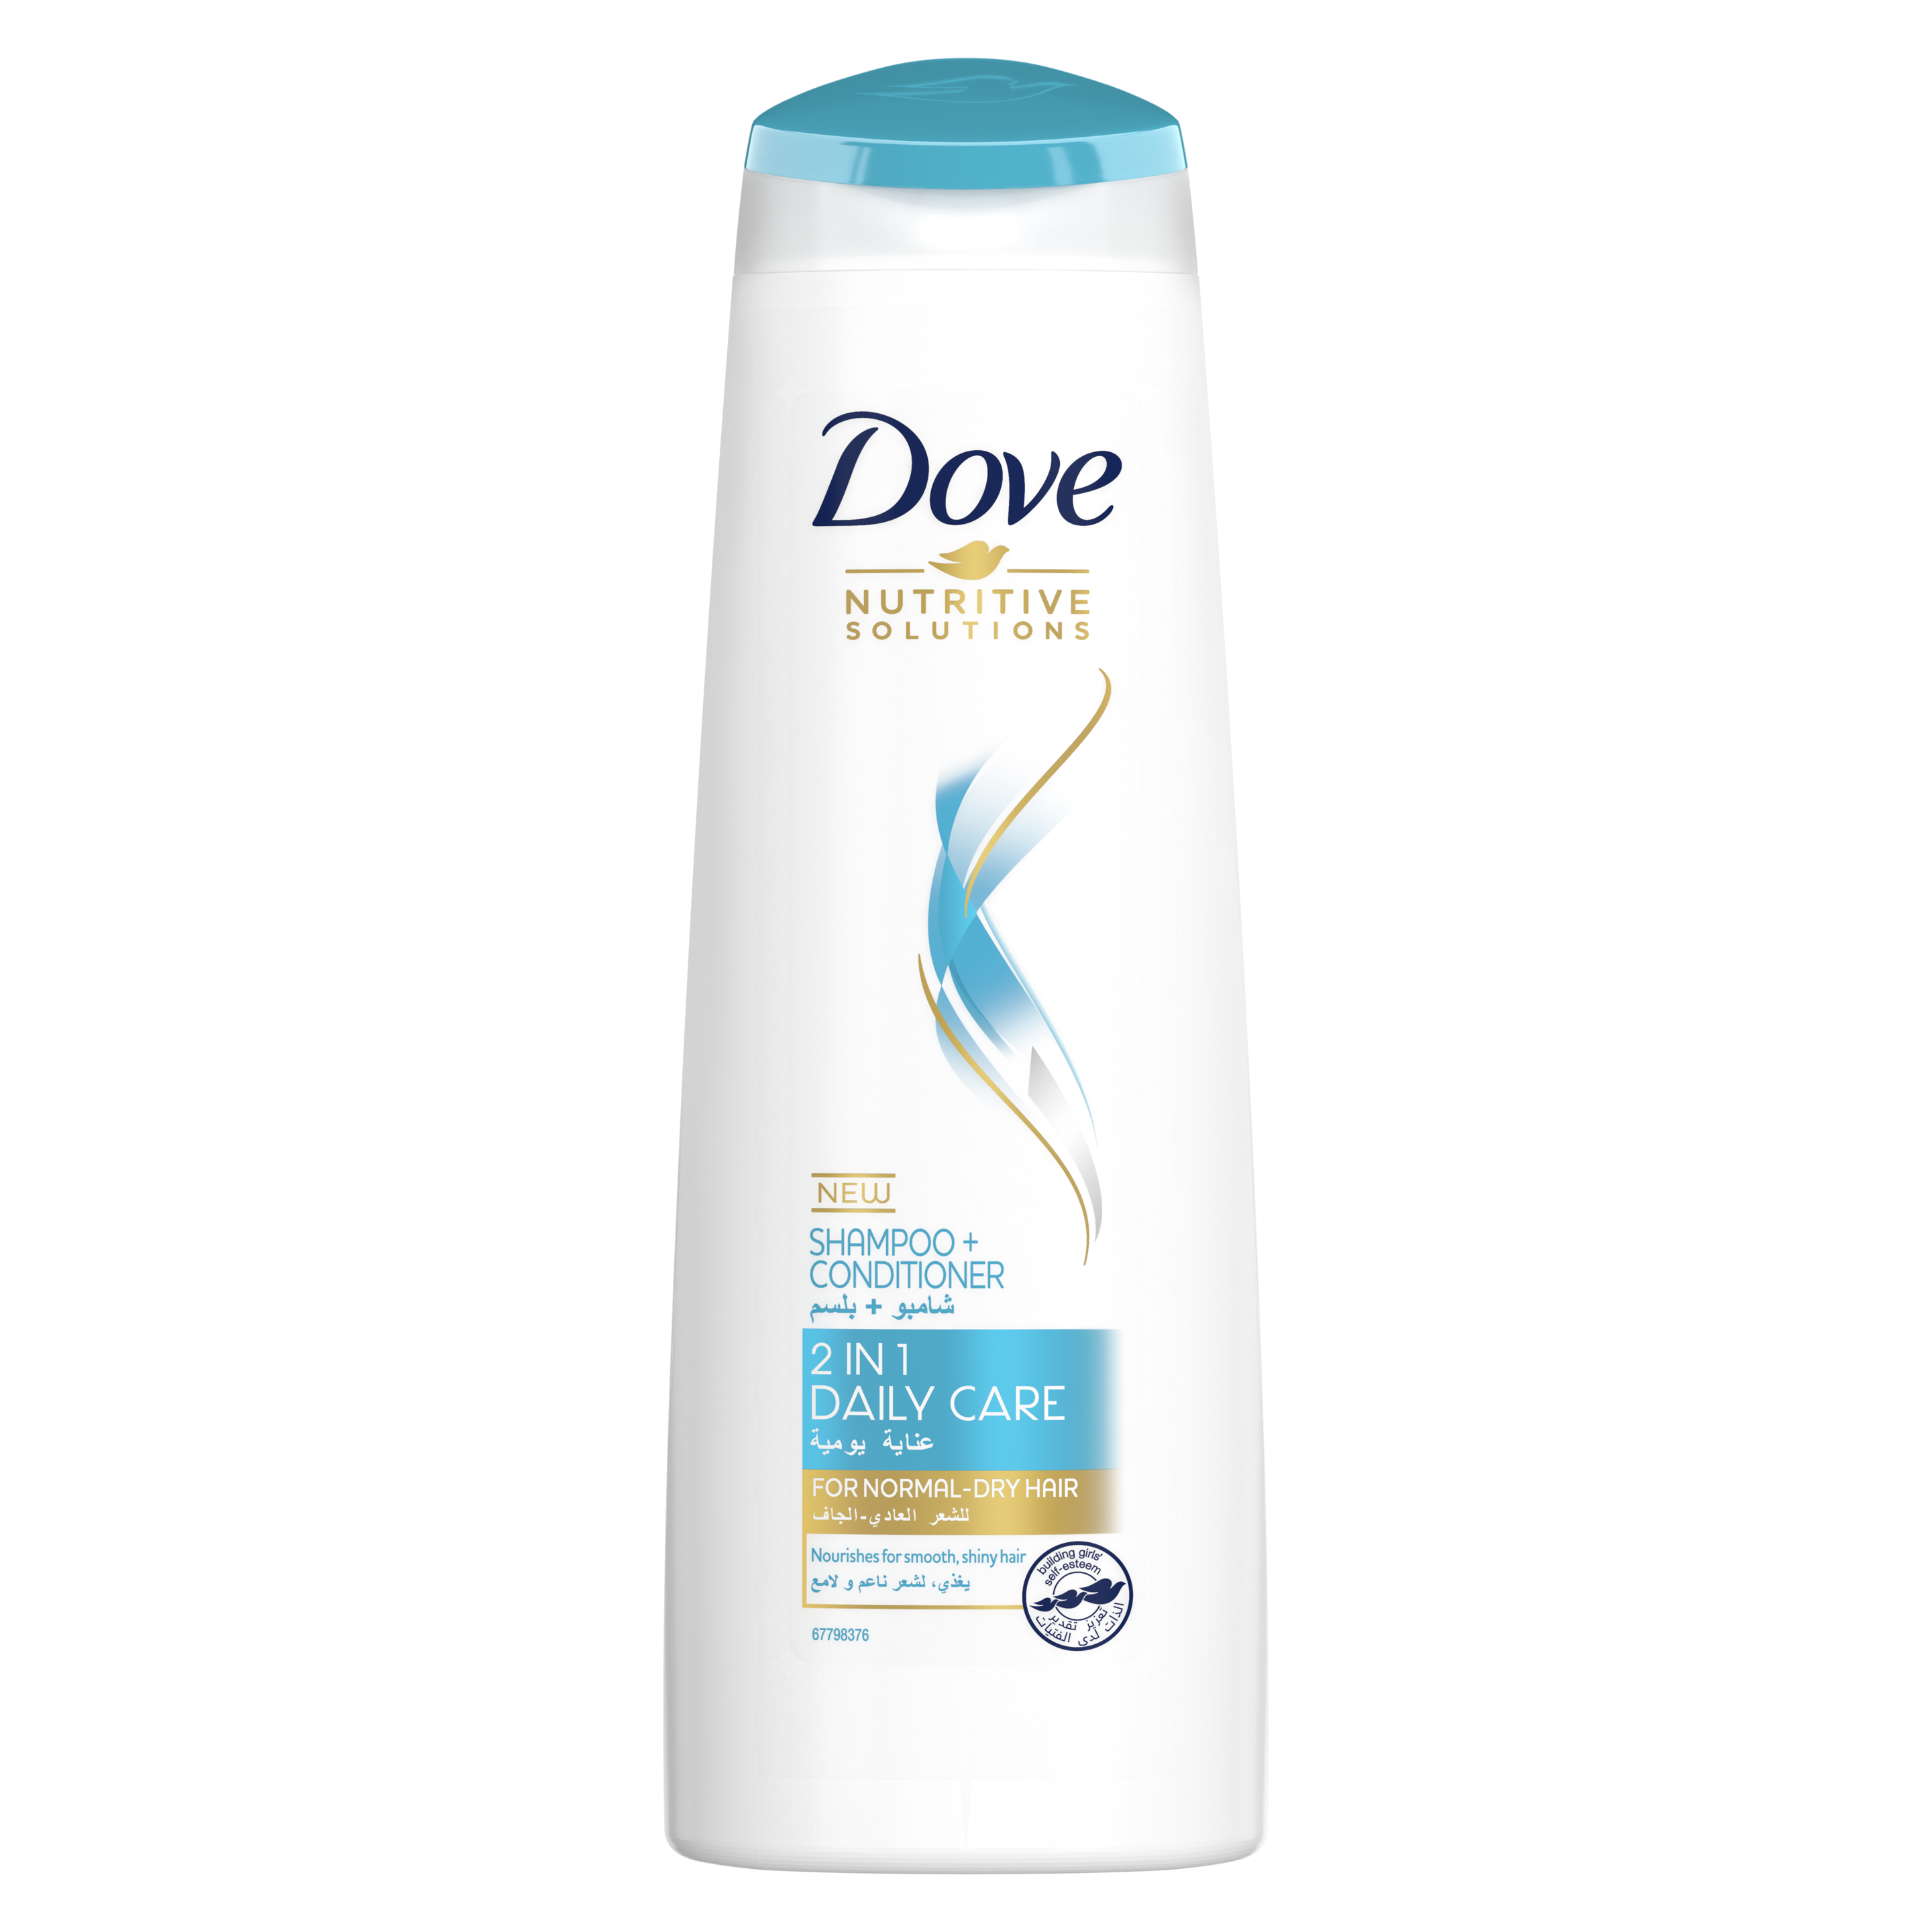 Dove Nutritive Solutions Daily Care 2 in 1 Shampoo 400ml